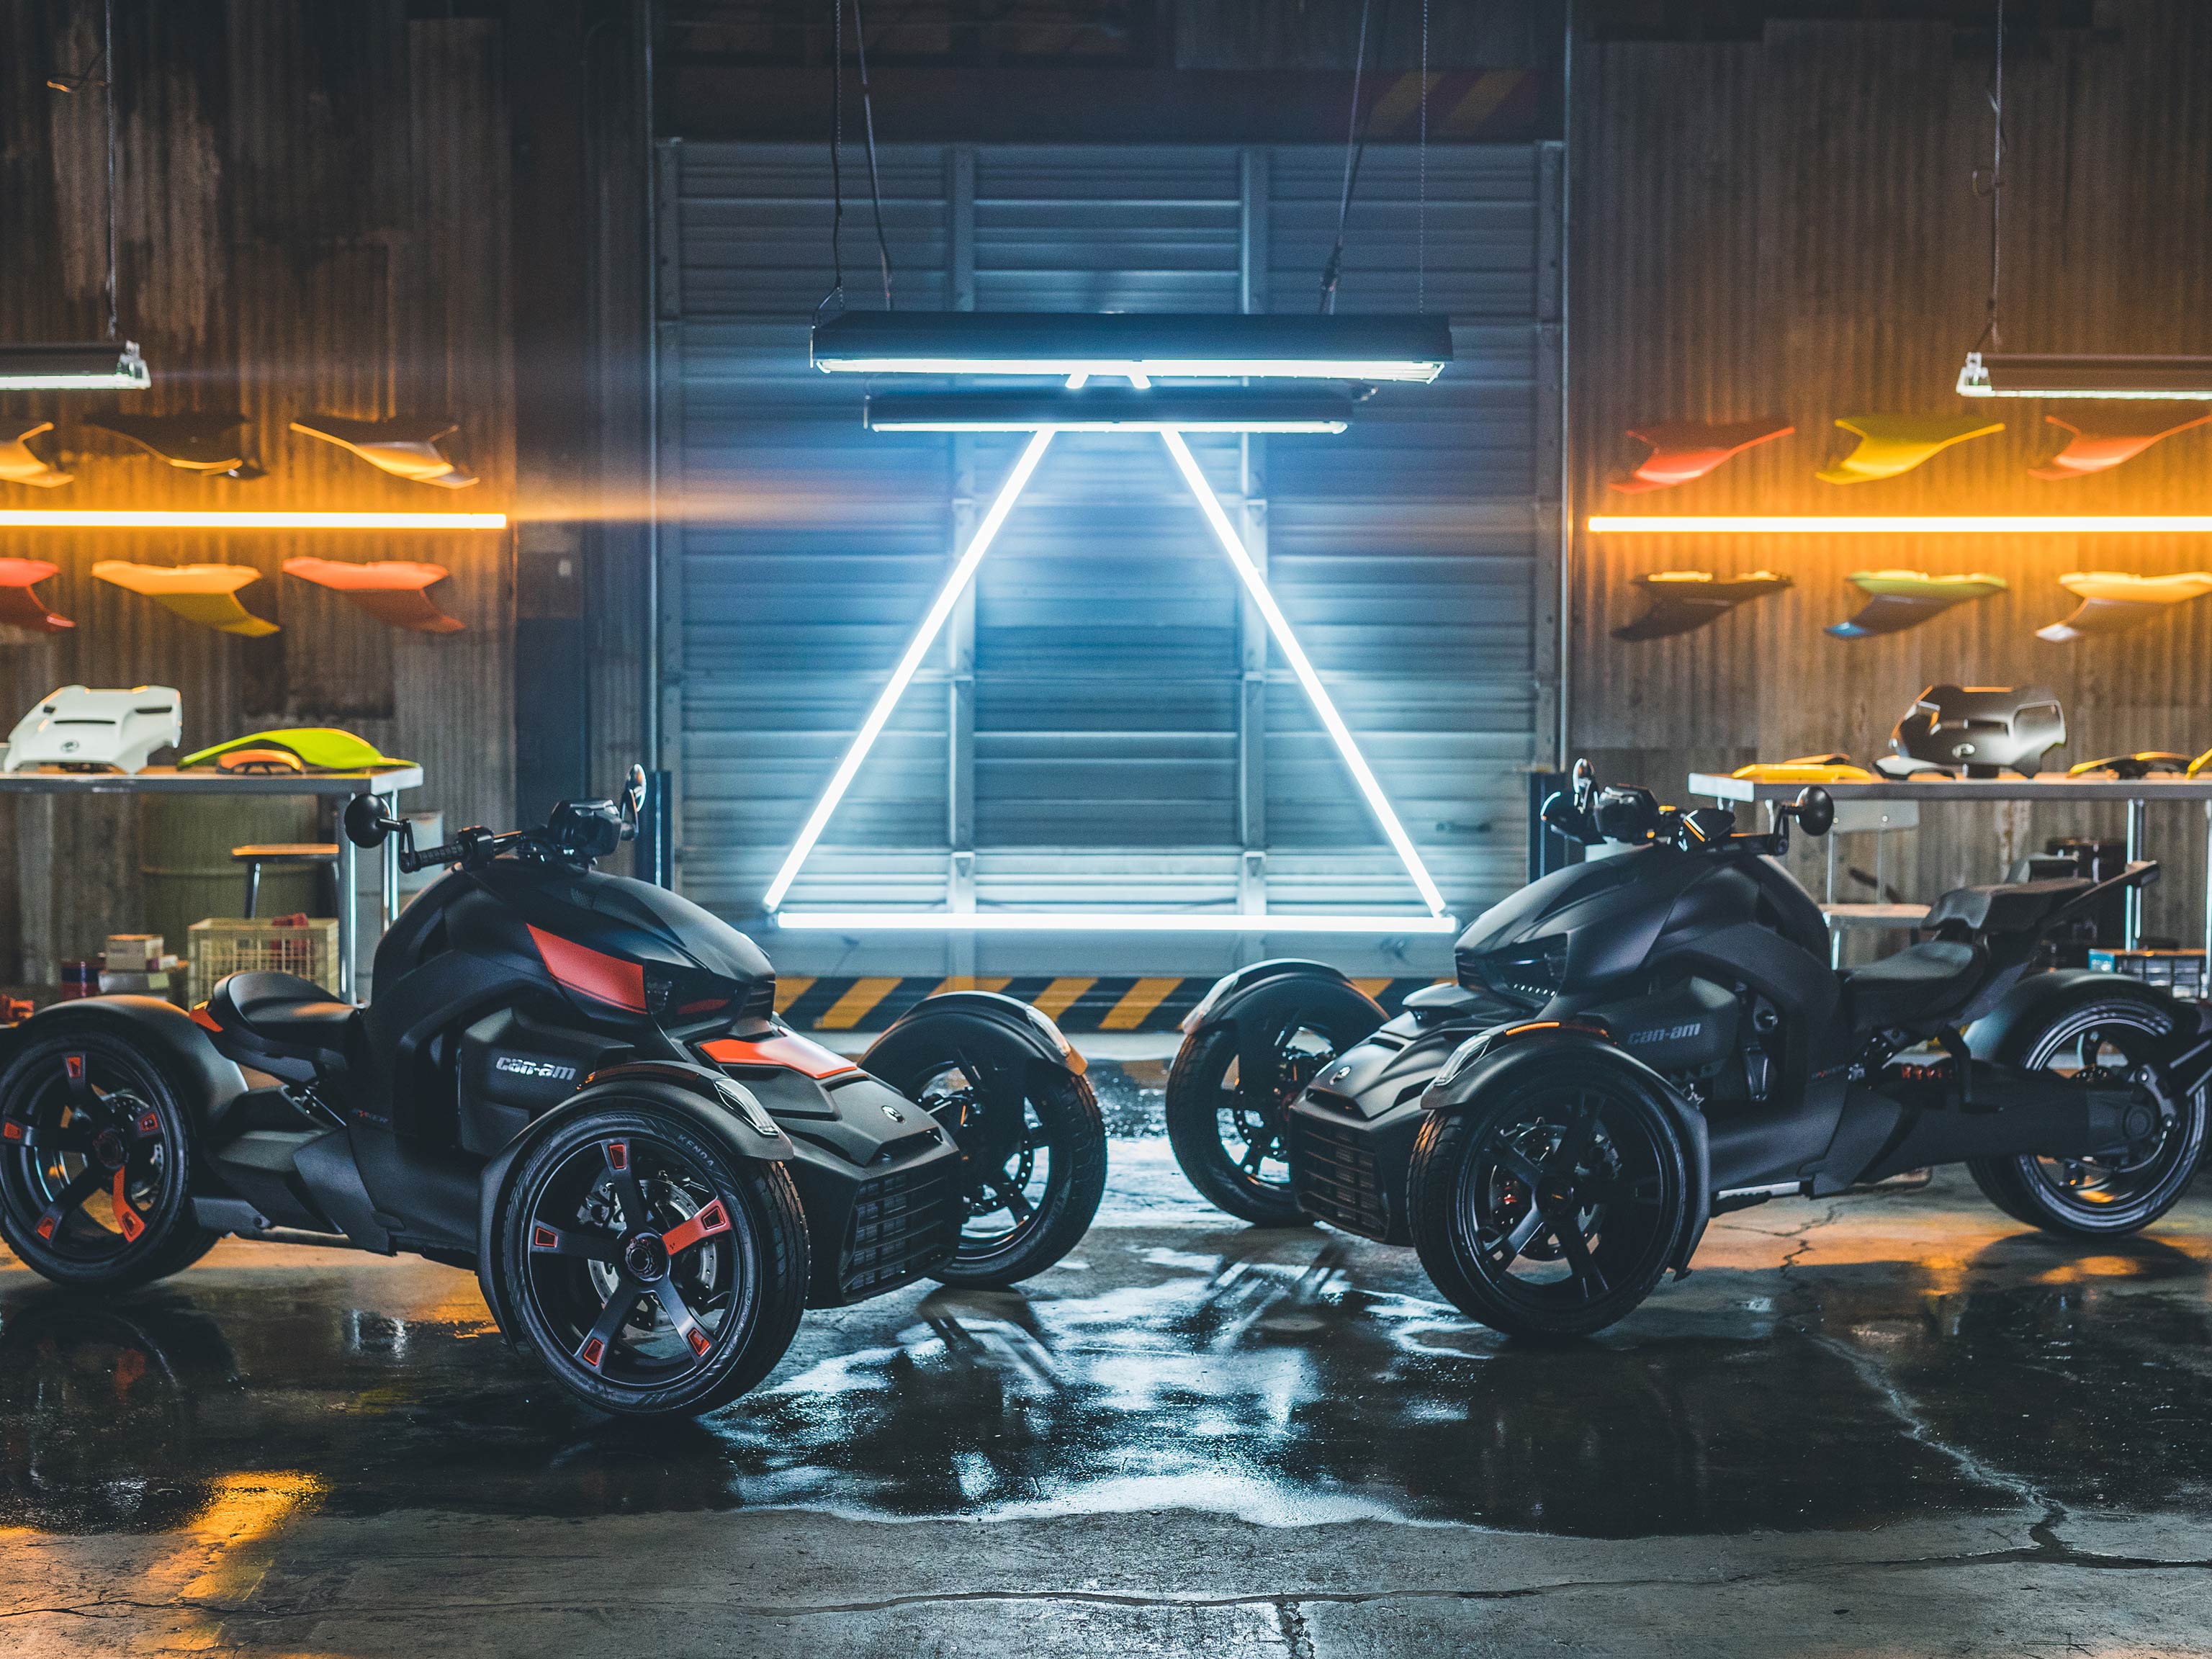 Pair of Ryker vehicles in a garage